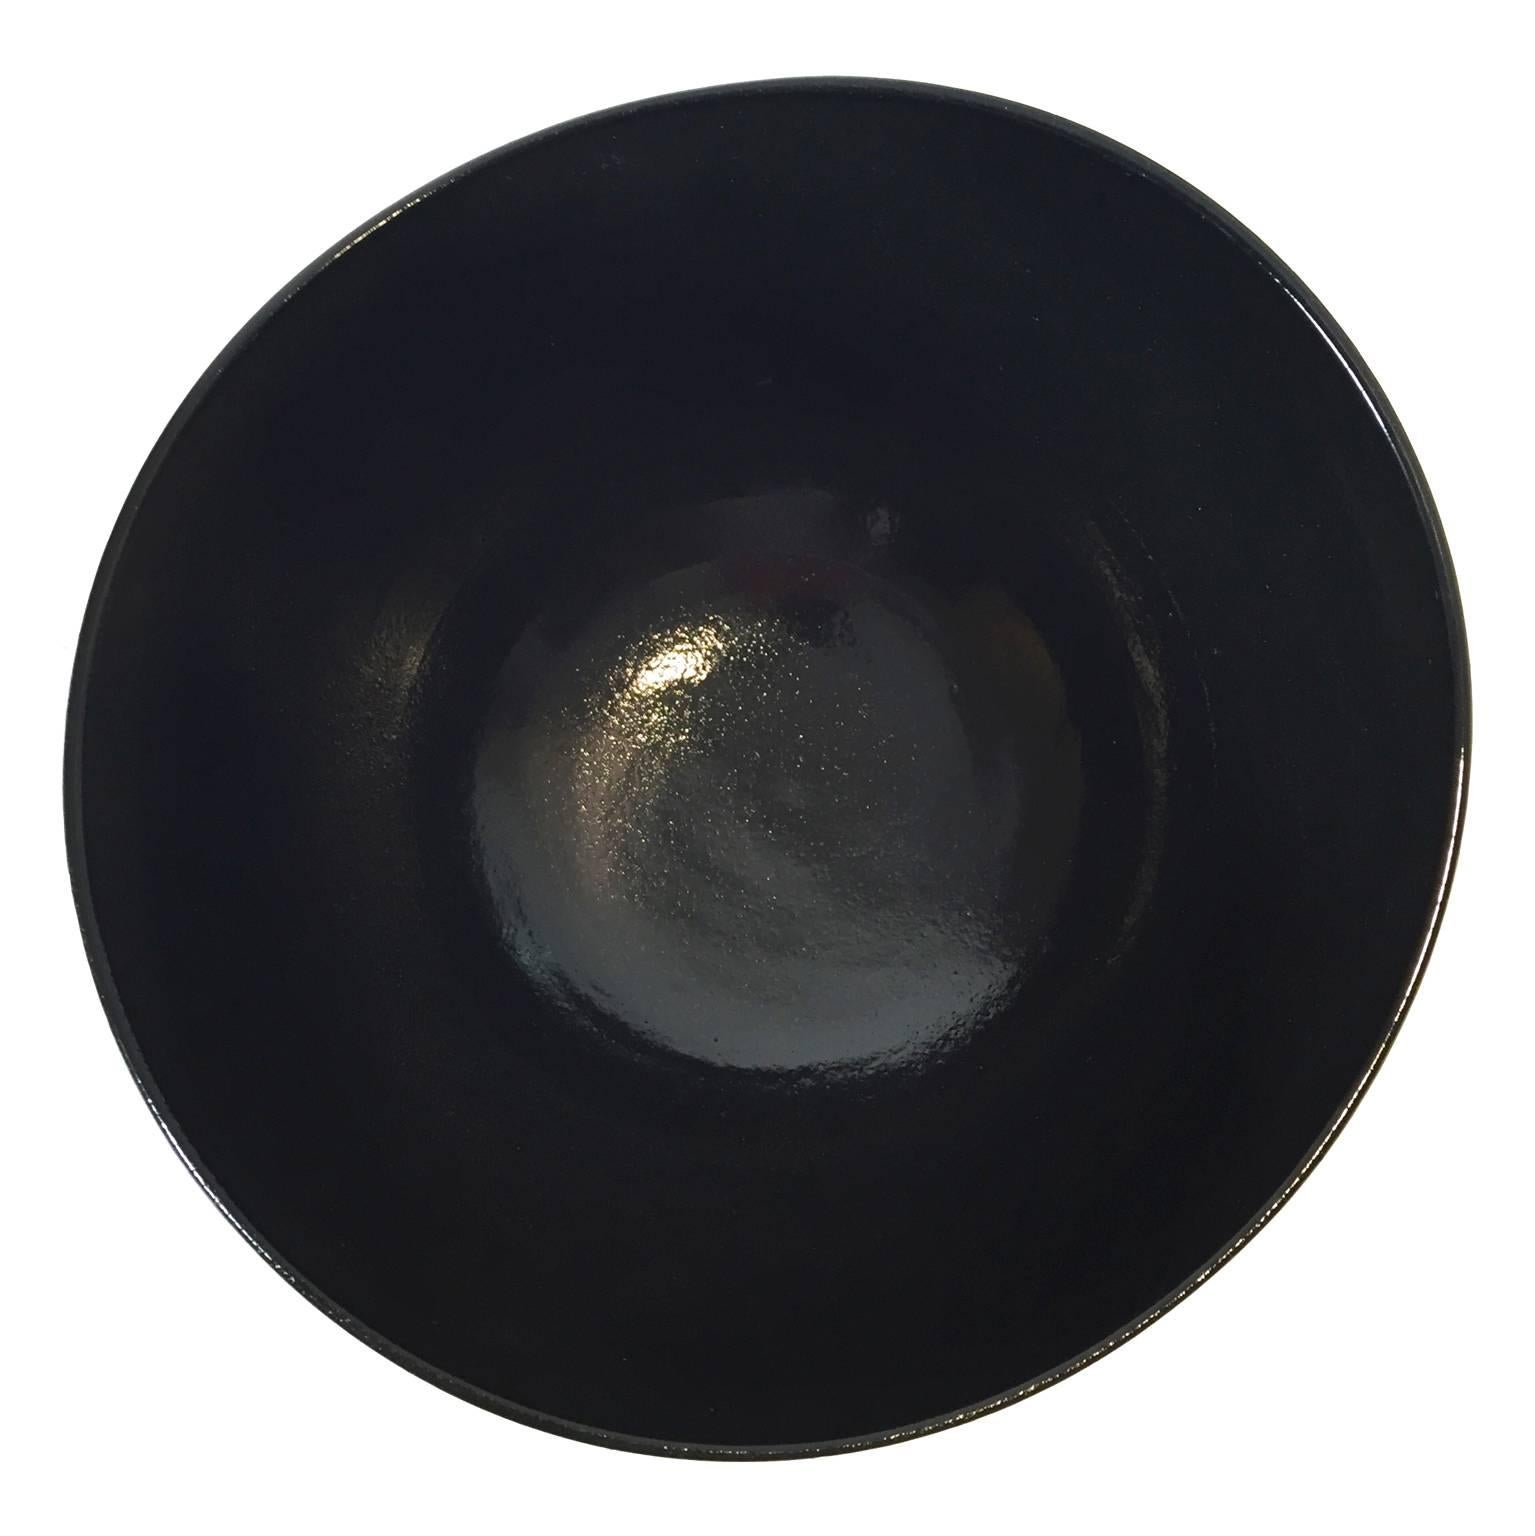 Asymmetrical ceramic curved bowl with matte black ombre glaze exterior and black gloss interior by Sandi Fellman, 2016. 

Veteran photographer Sandi Fellman's ceramic vessels are an exploration of a new medium. The forms, palettes, and sensuality